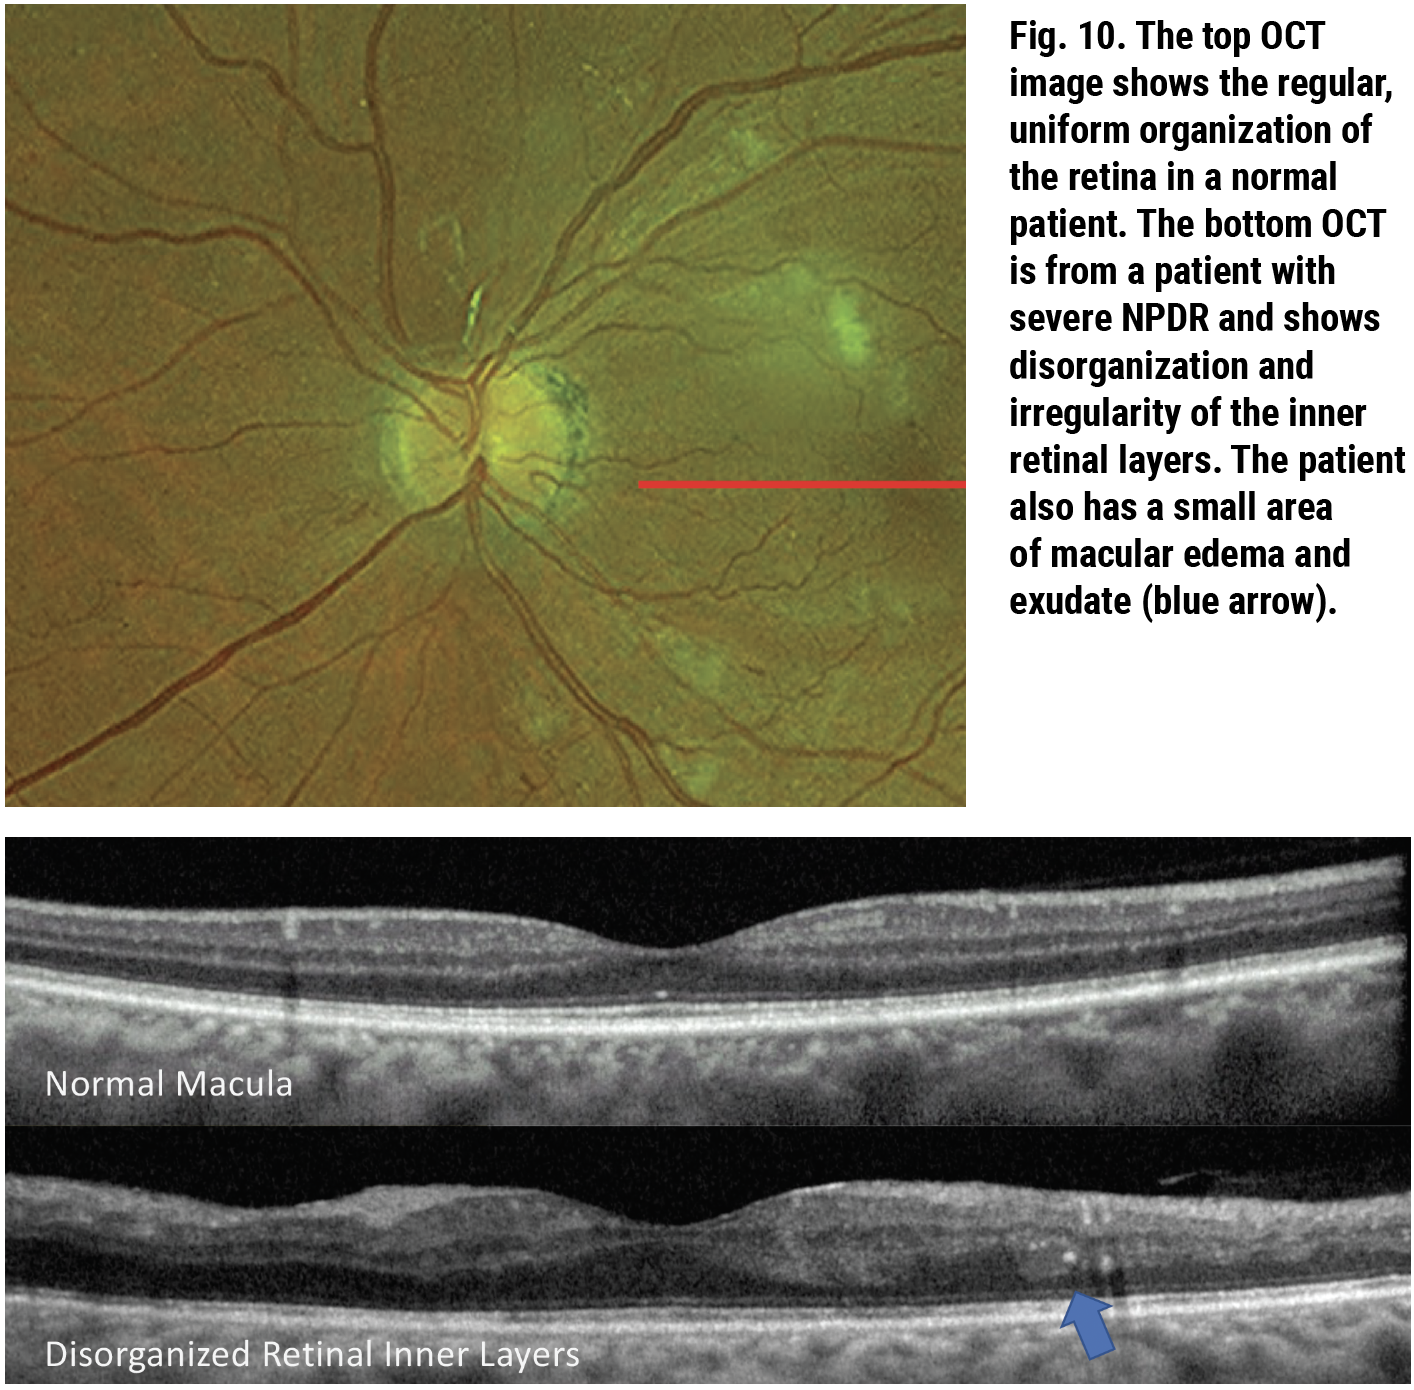 Fig. 10. The top OCT image shows the regular, uniform organization of the retina in a normal patient. The bottom OCT is from a patient with severe NPDR and shows disorganization and irregularity of the inner retinal layers. The patient also has a small area of macular edema and exudate (blue arrow).